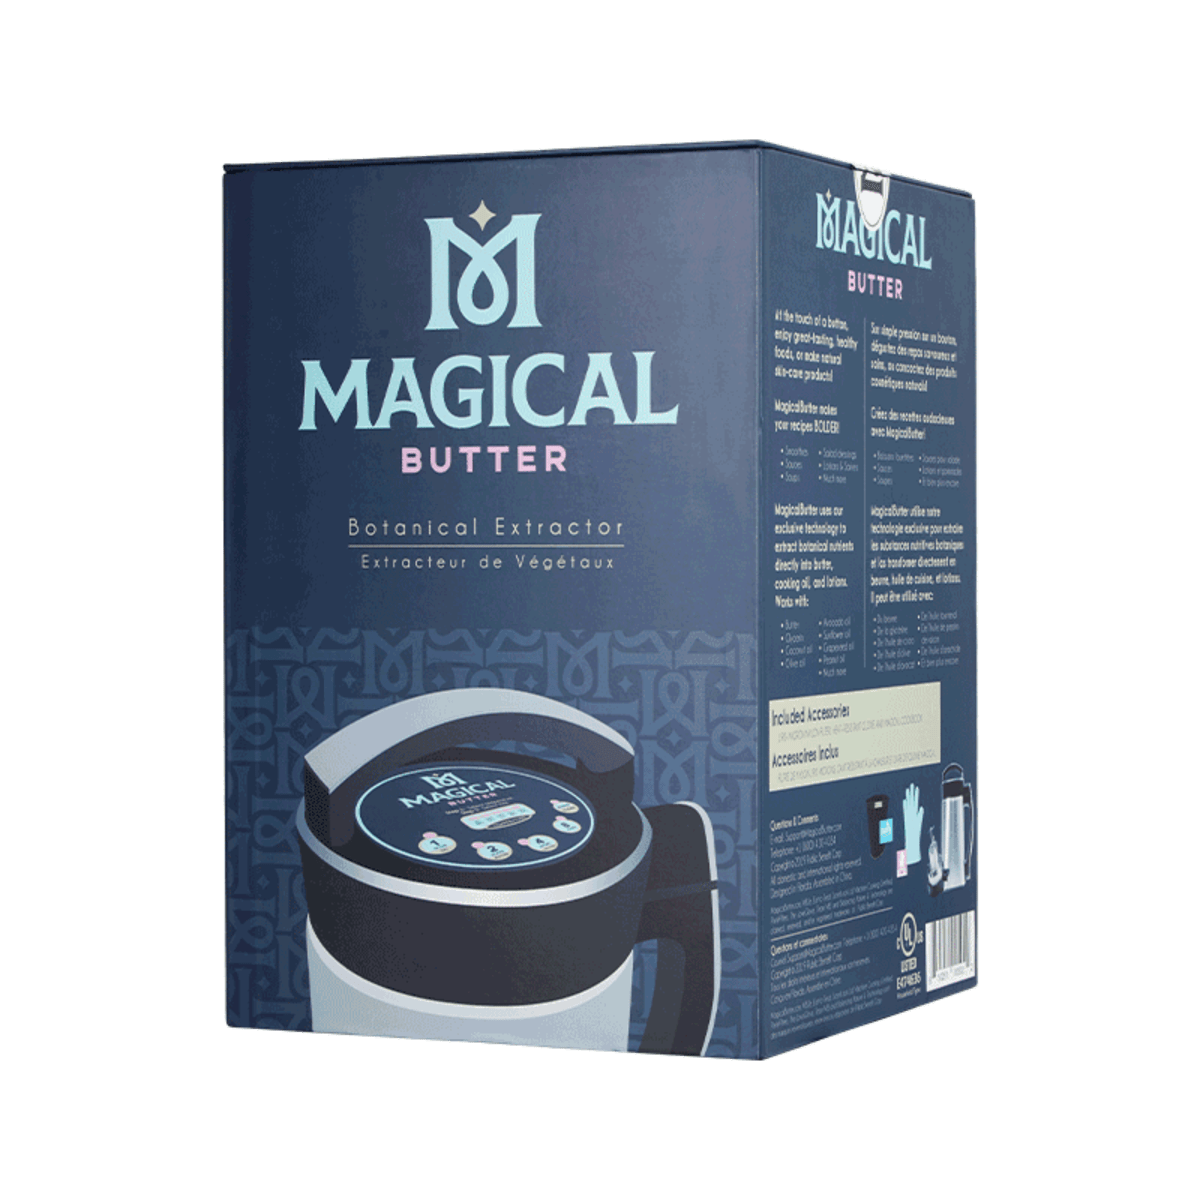 Magical Butter Countertop Botanical Extractor Review - Powered by Mom